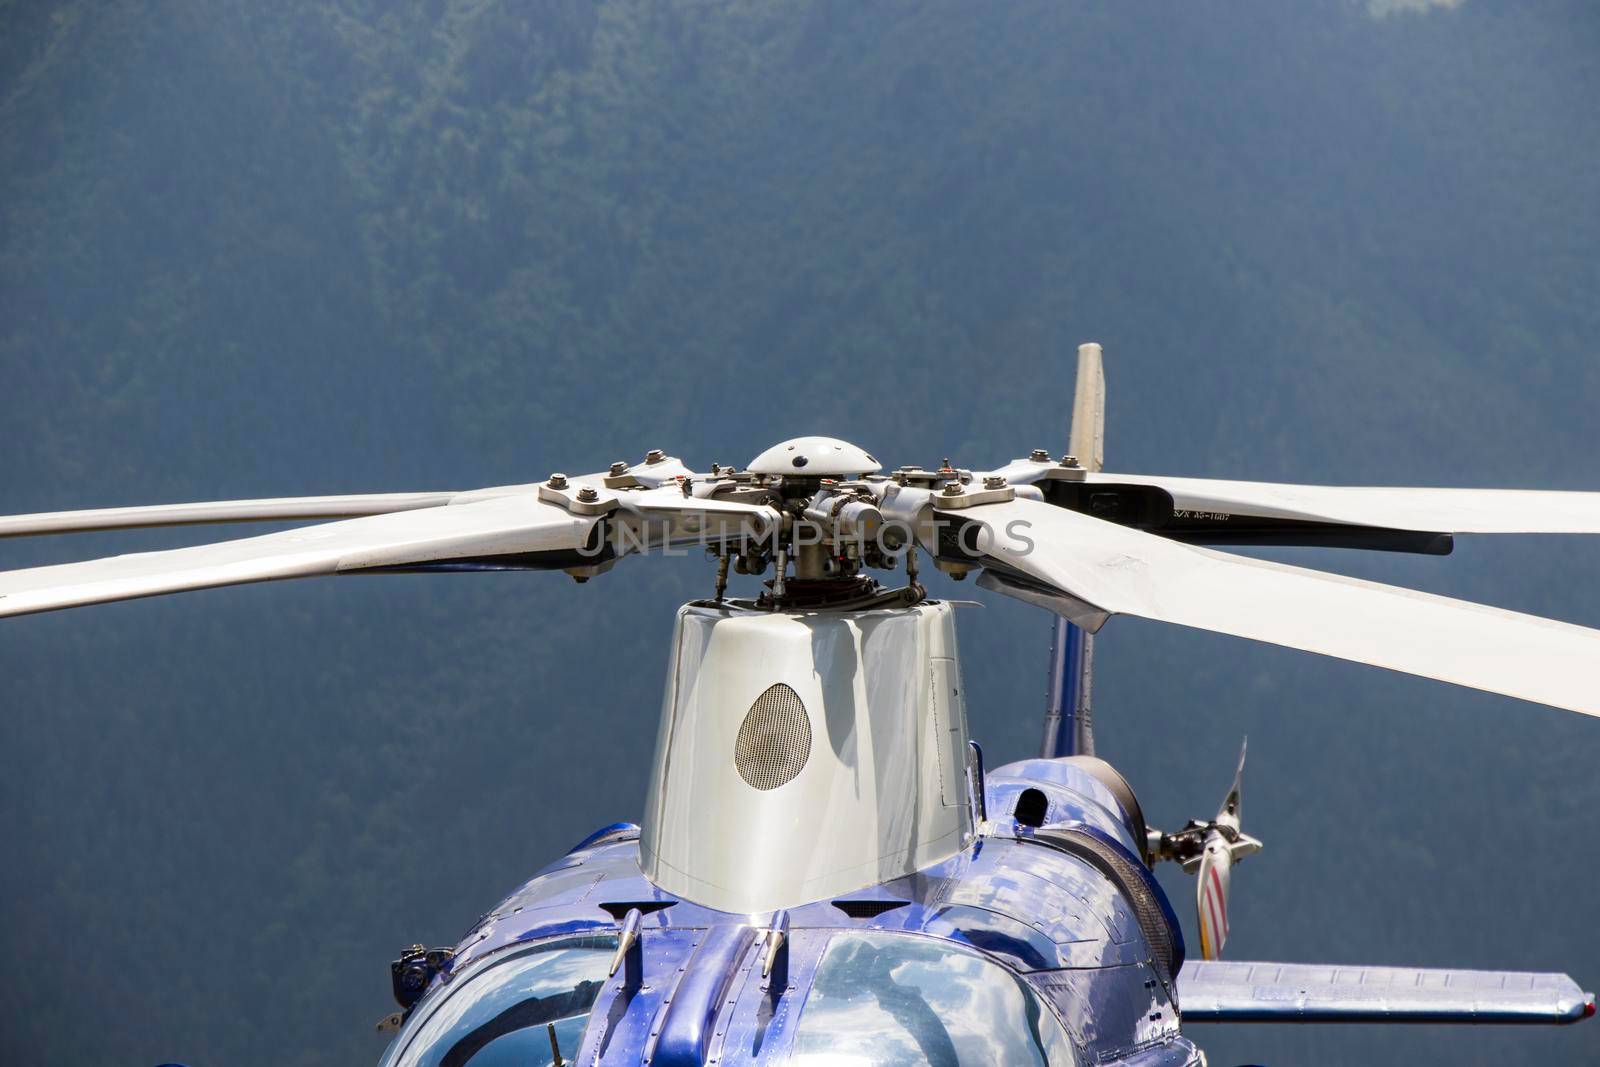 Helicopter close-up, blue and white helicopterview by Taidundua